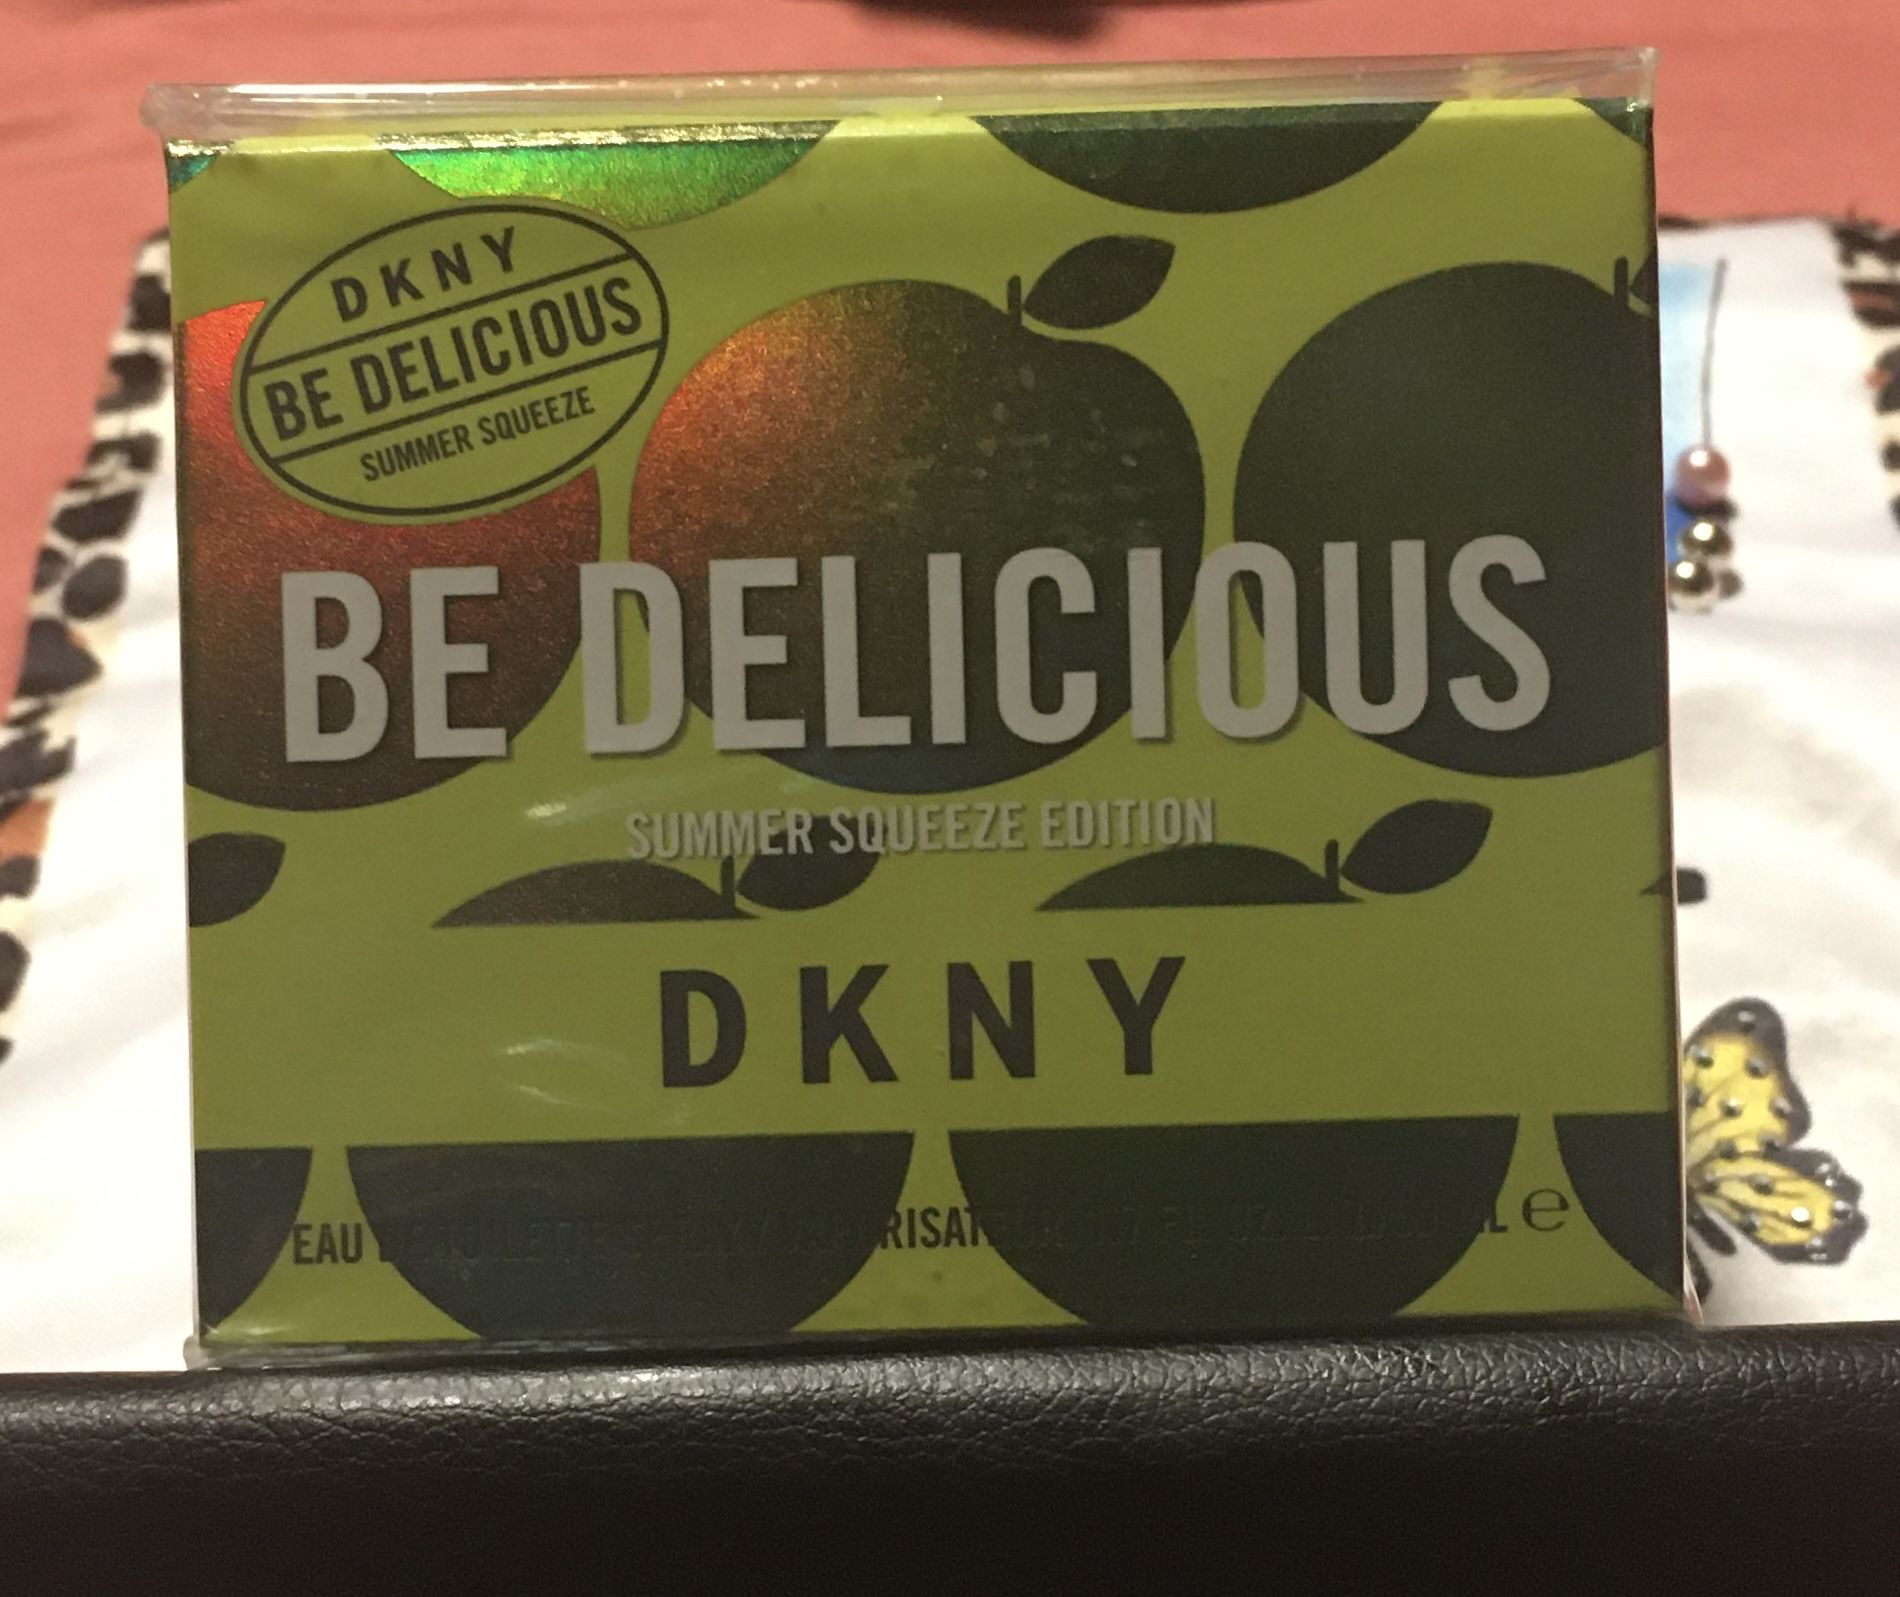 DKNY Be Delicious Summer Squeeze Perfume